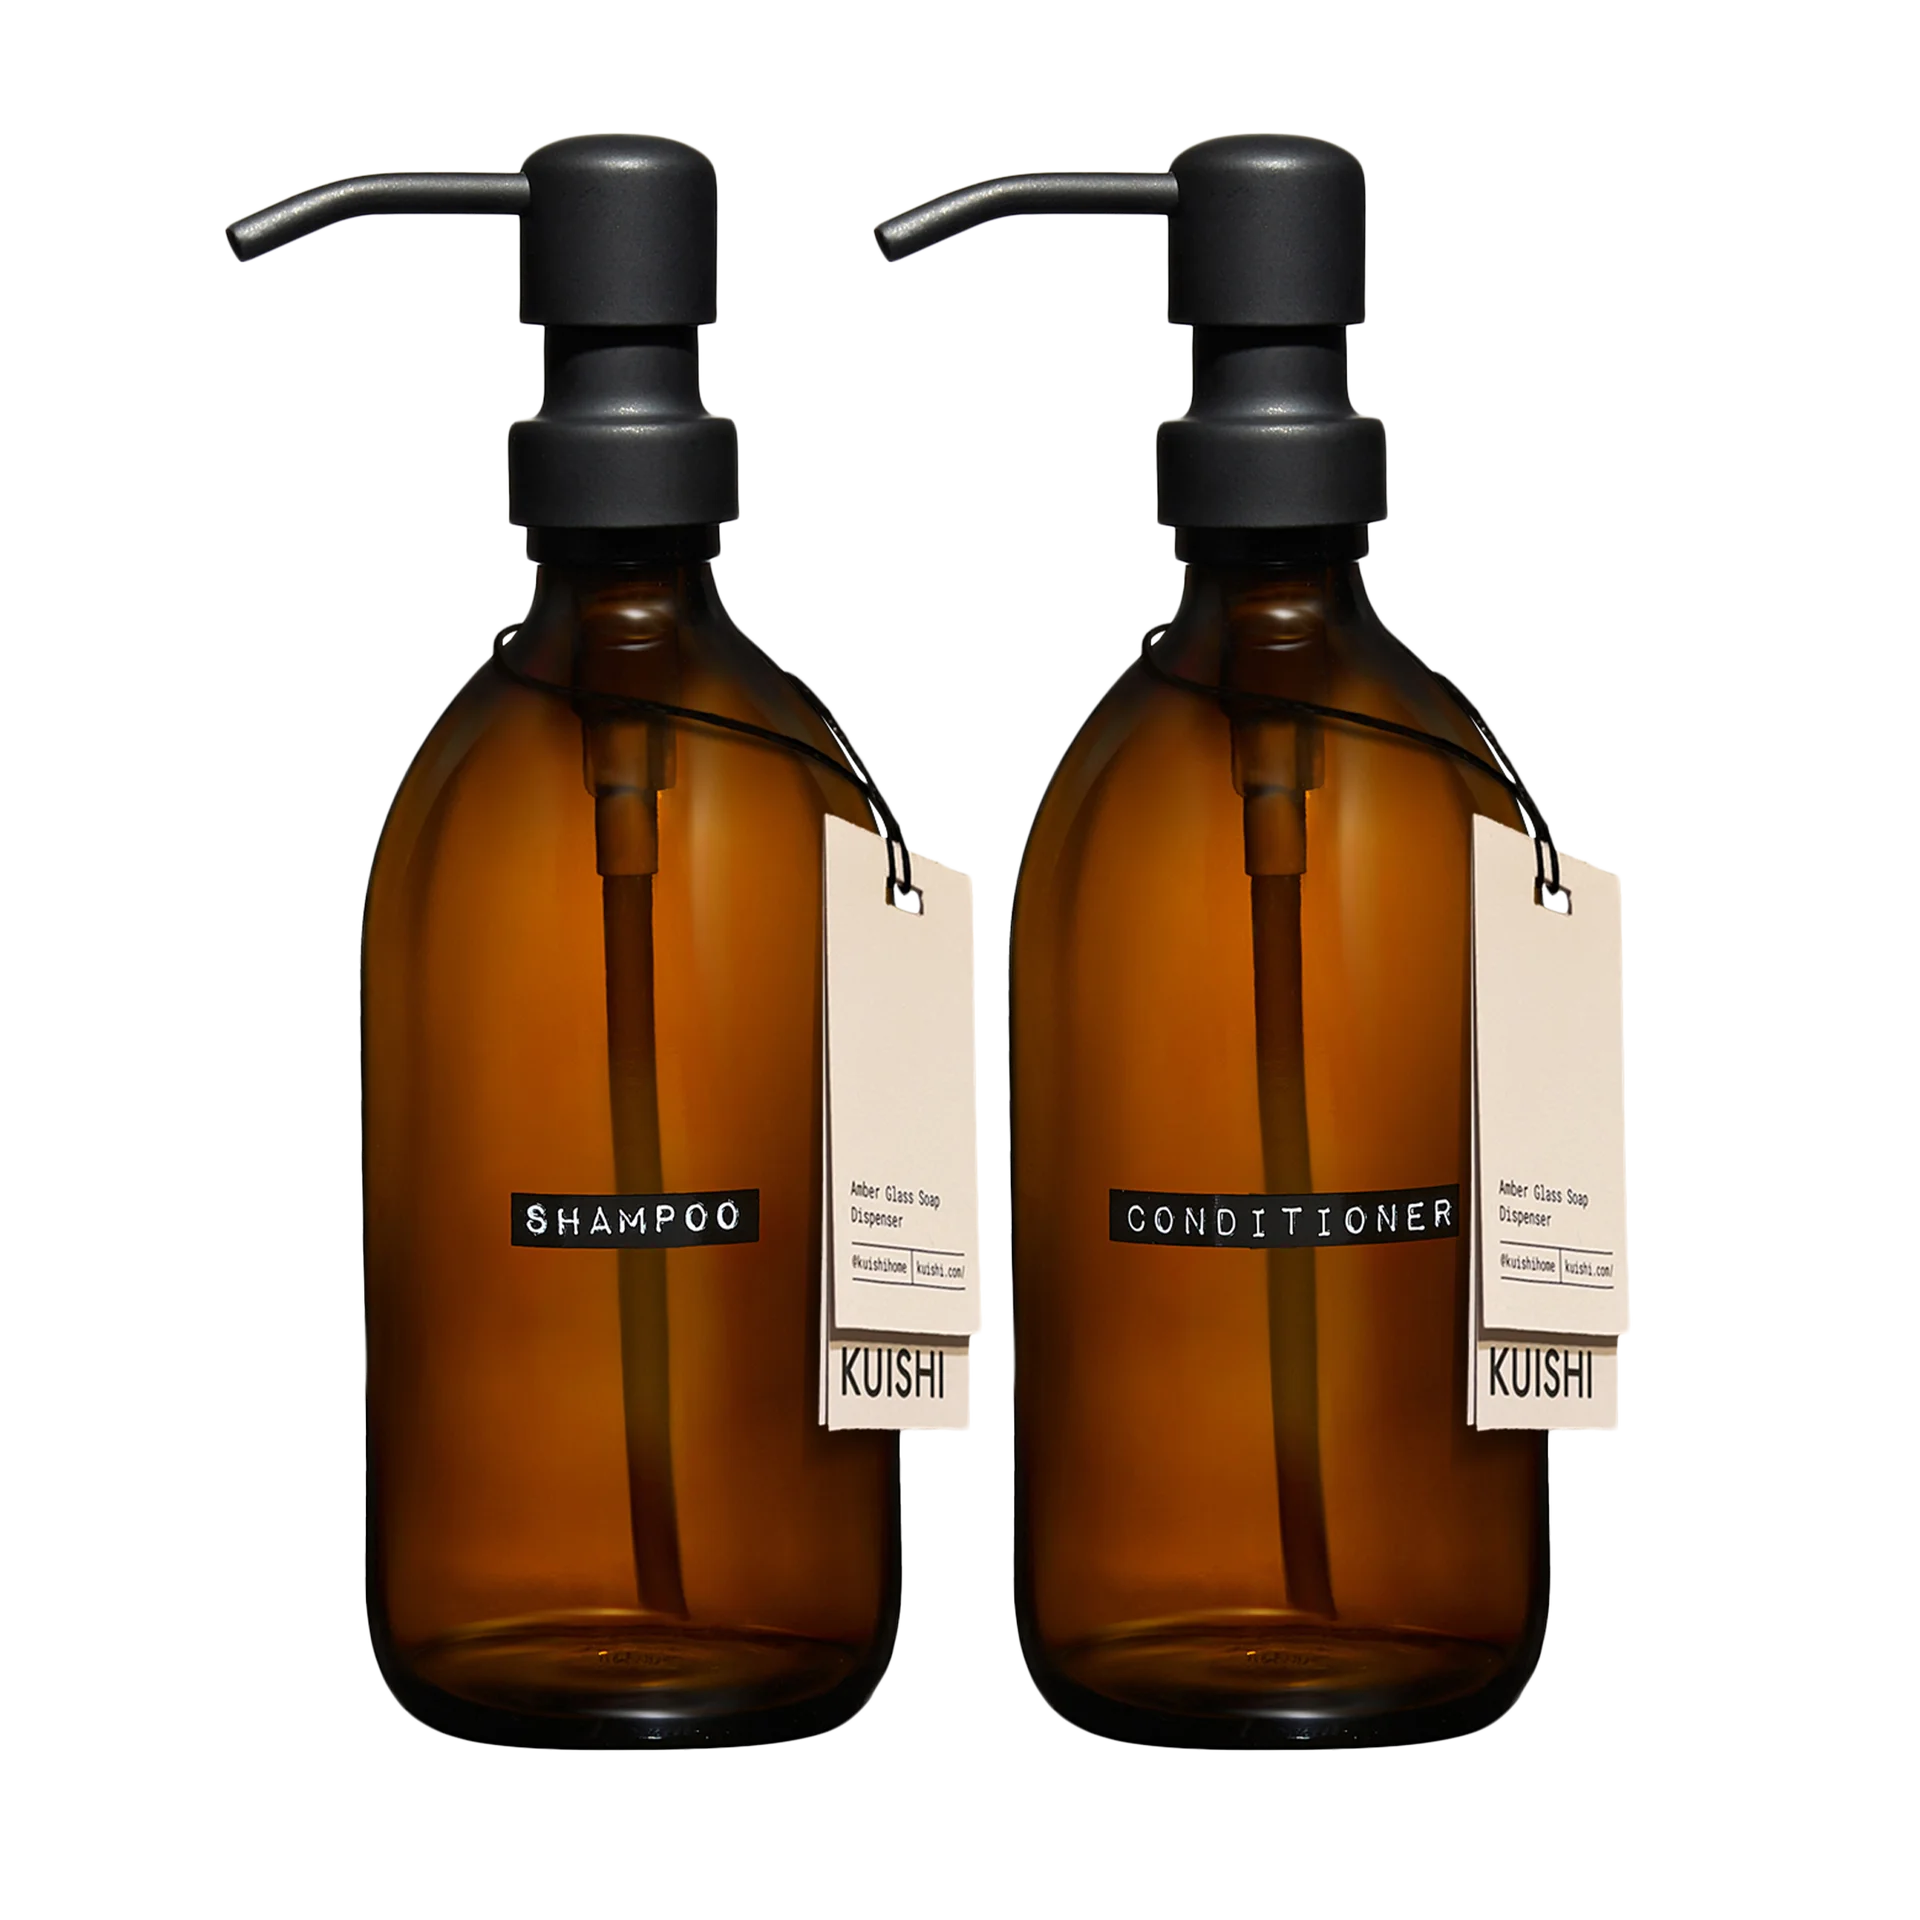 Shampoo and Conditioner bottles